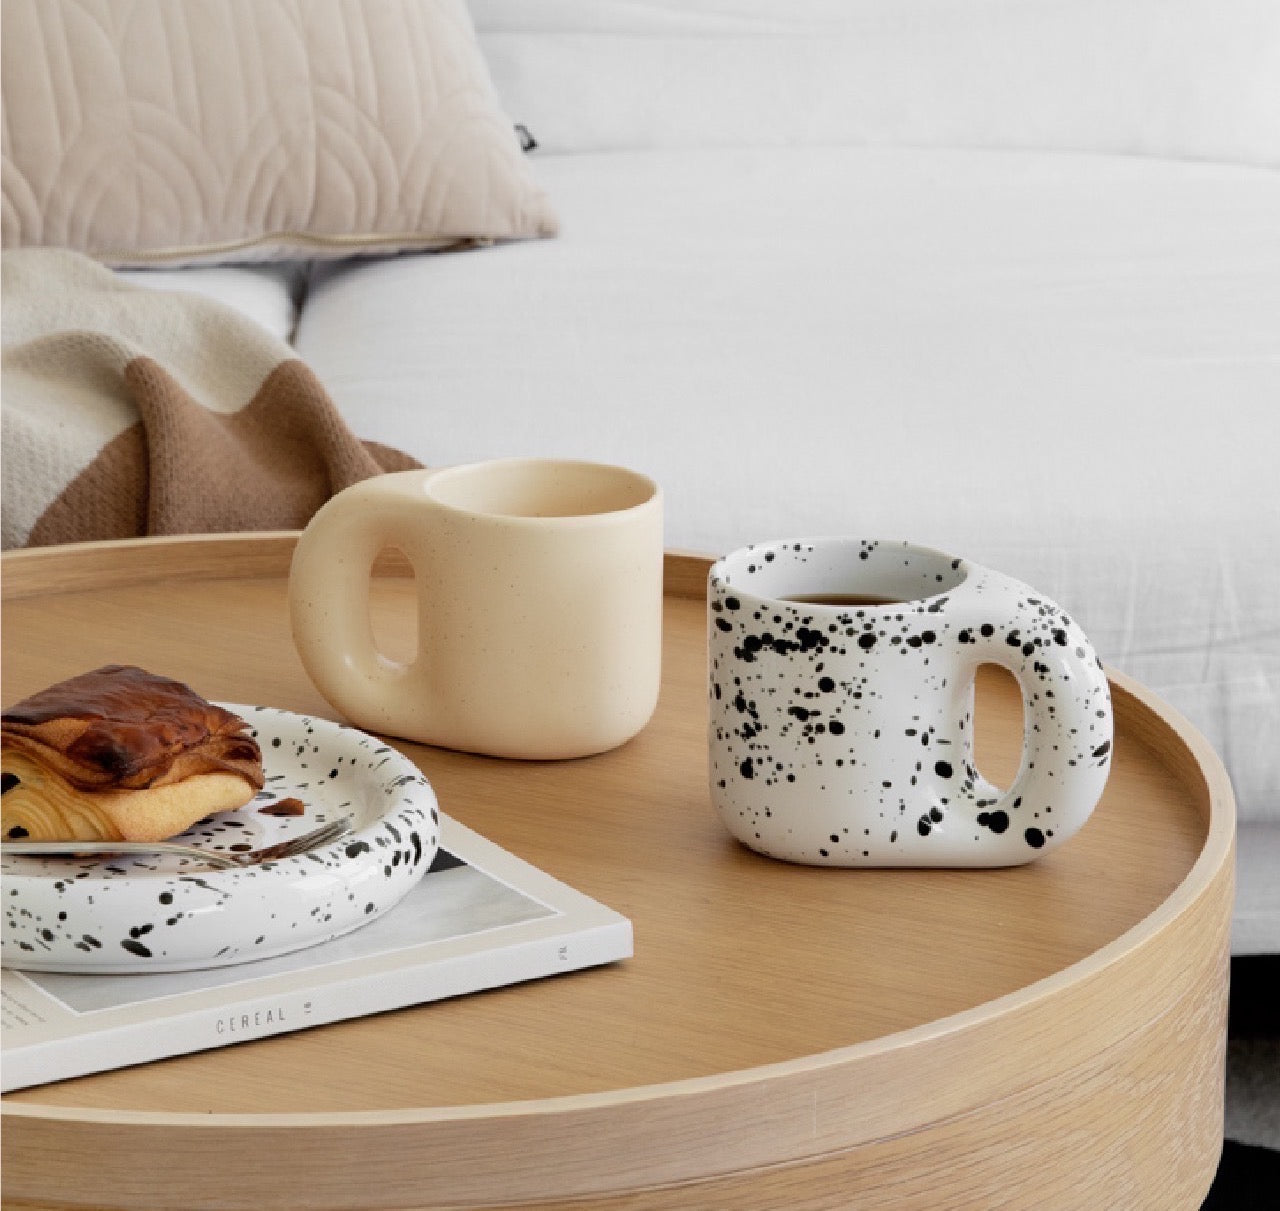 Experience the charm of funky artisanal coffee mugs, reminiscent of a Parisian breakfast, available at ARCHIVE. Elevate your morning routine with this exquisite collection of artisanal kitchenware.